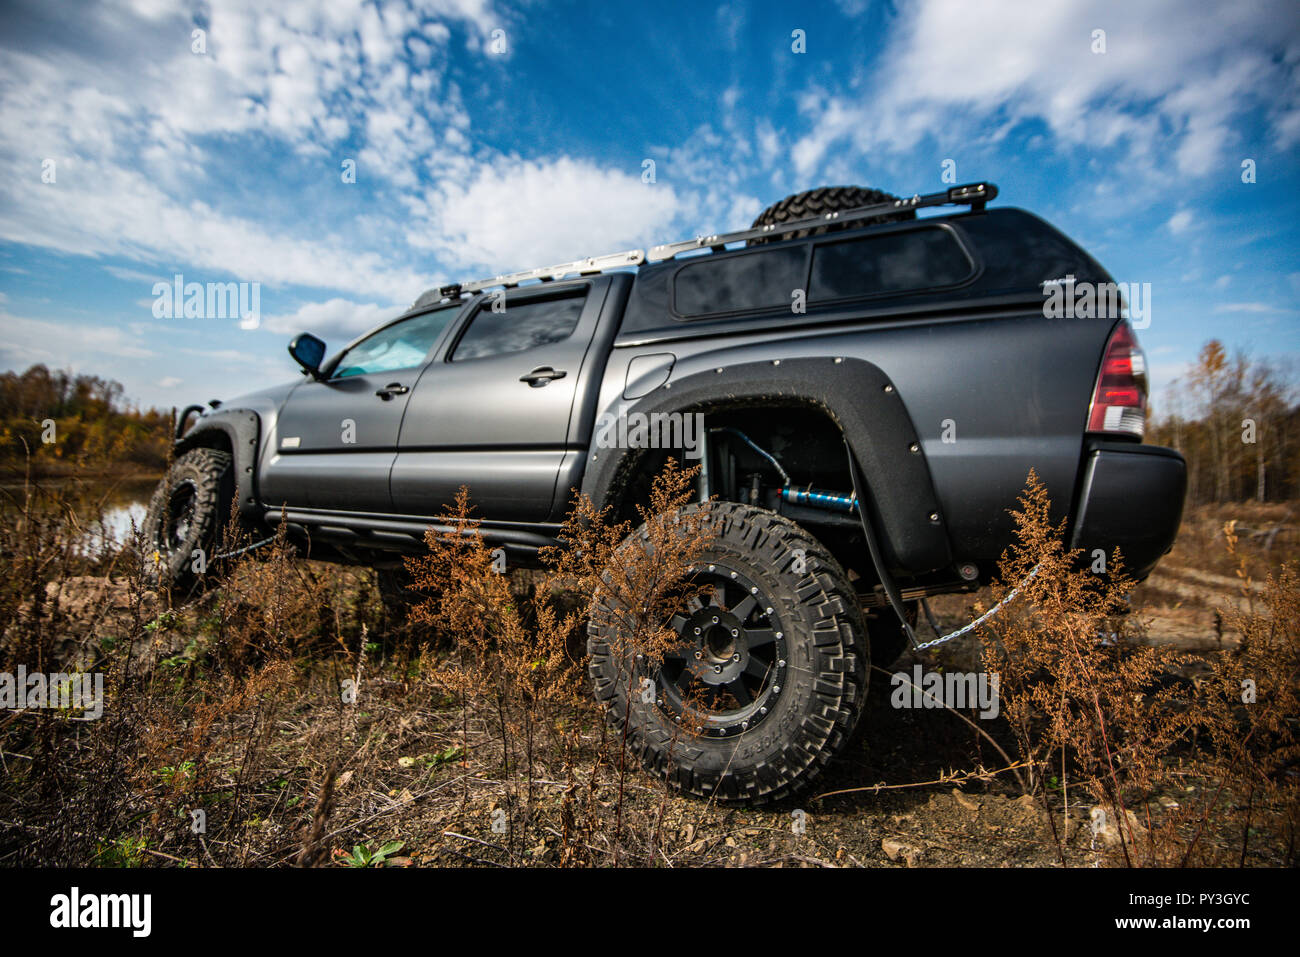 KHABAROVSK, RUSSIA - october 7, 2018: Toyota Tacoma quick ride on a offroad Stock Photo